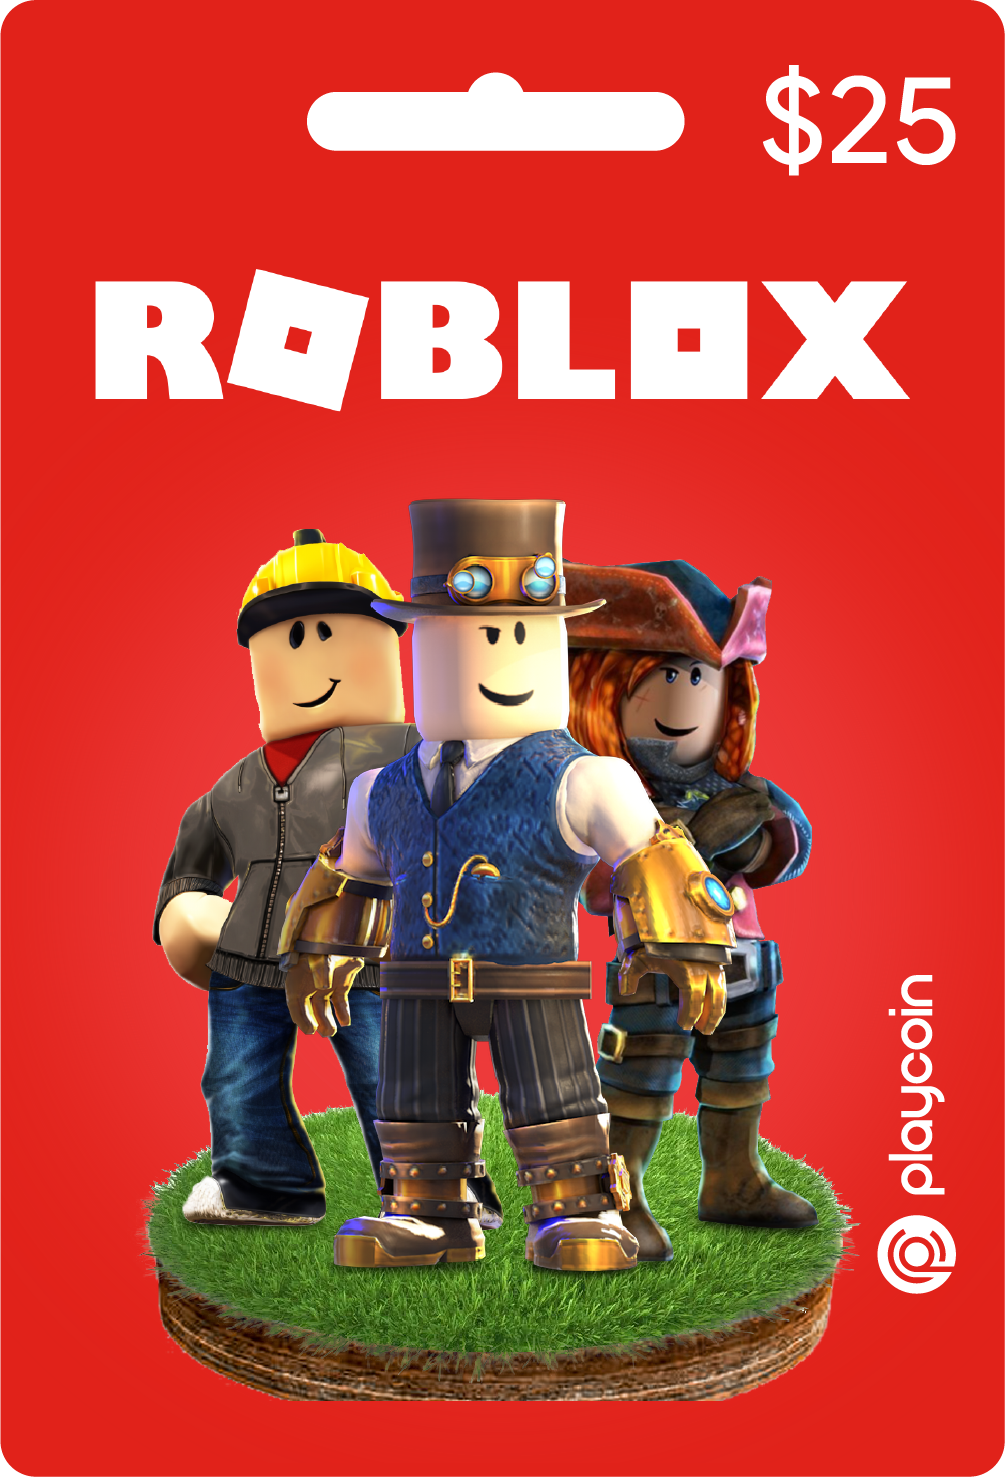 Robux Gift Card Singapore